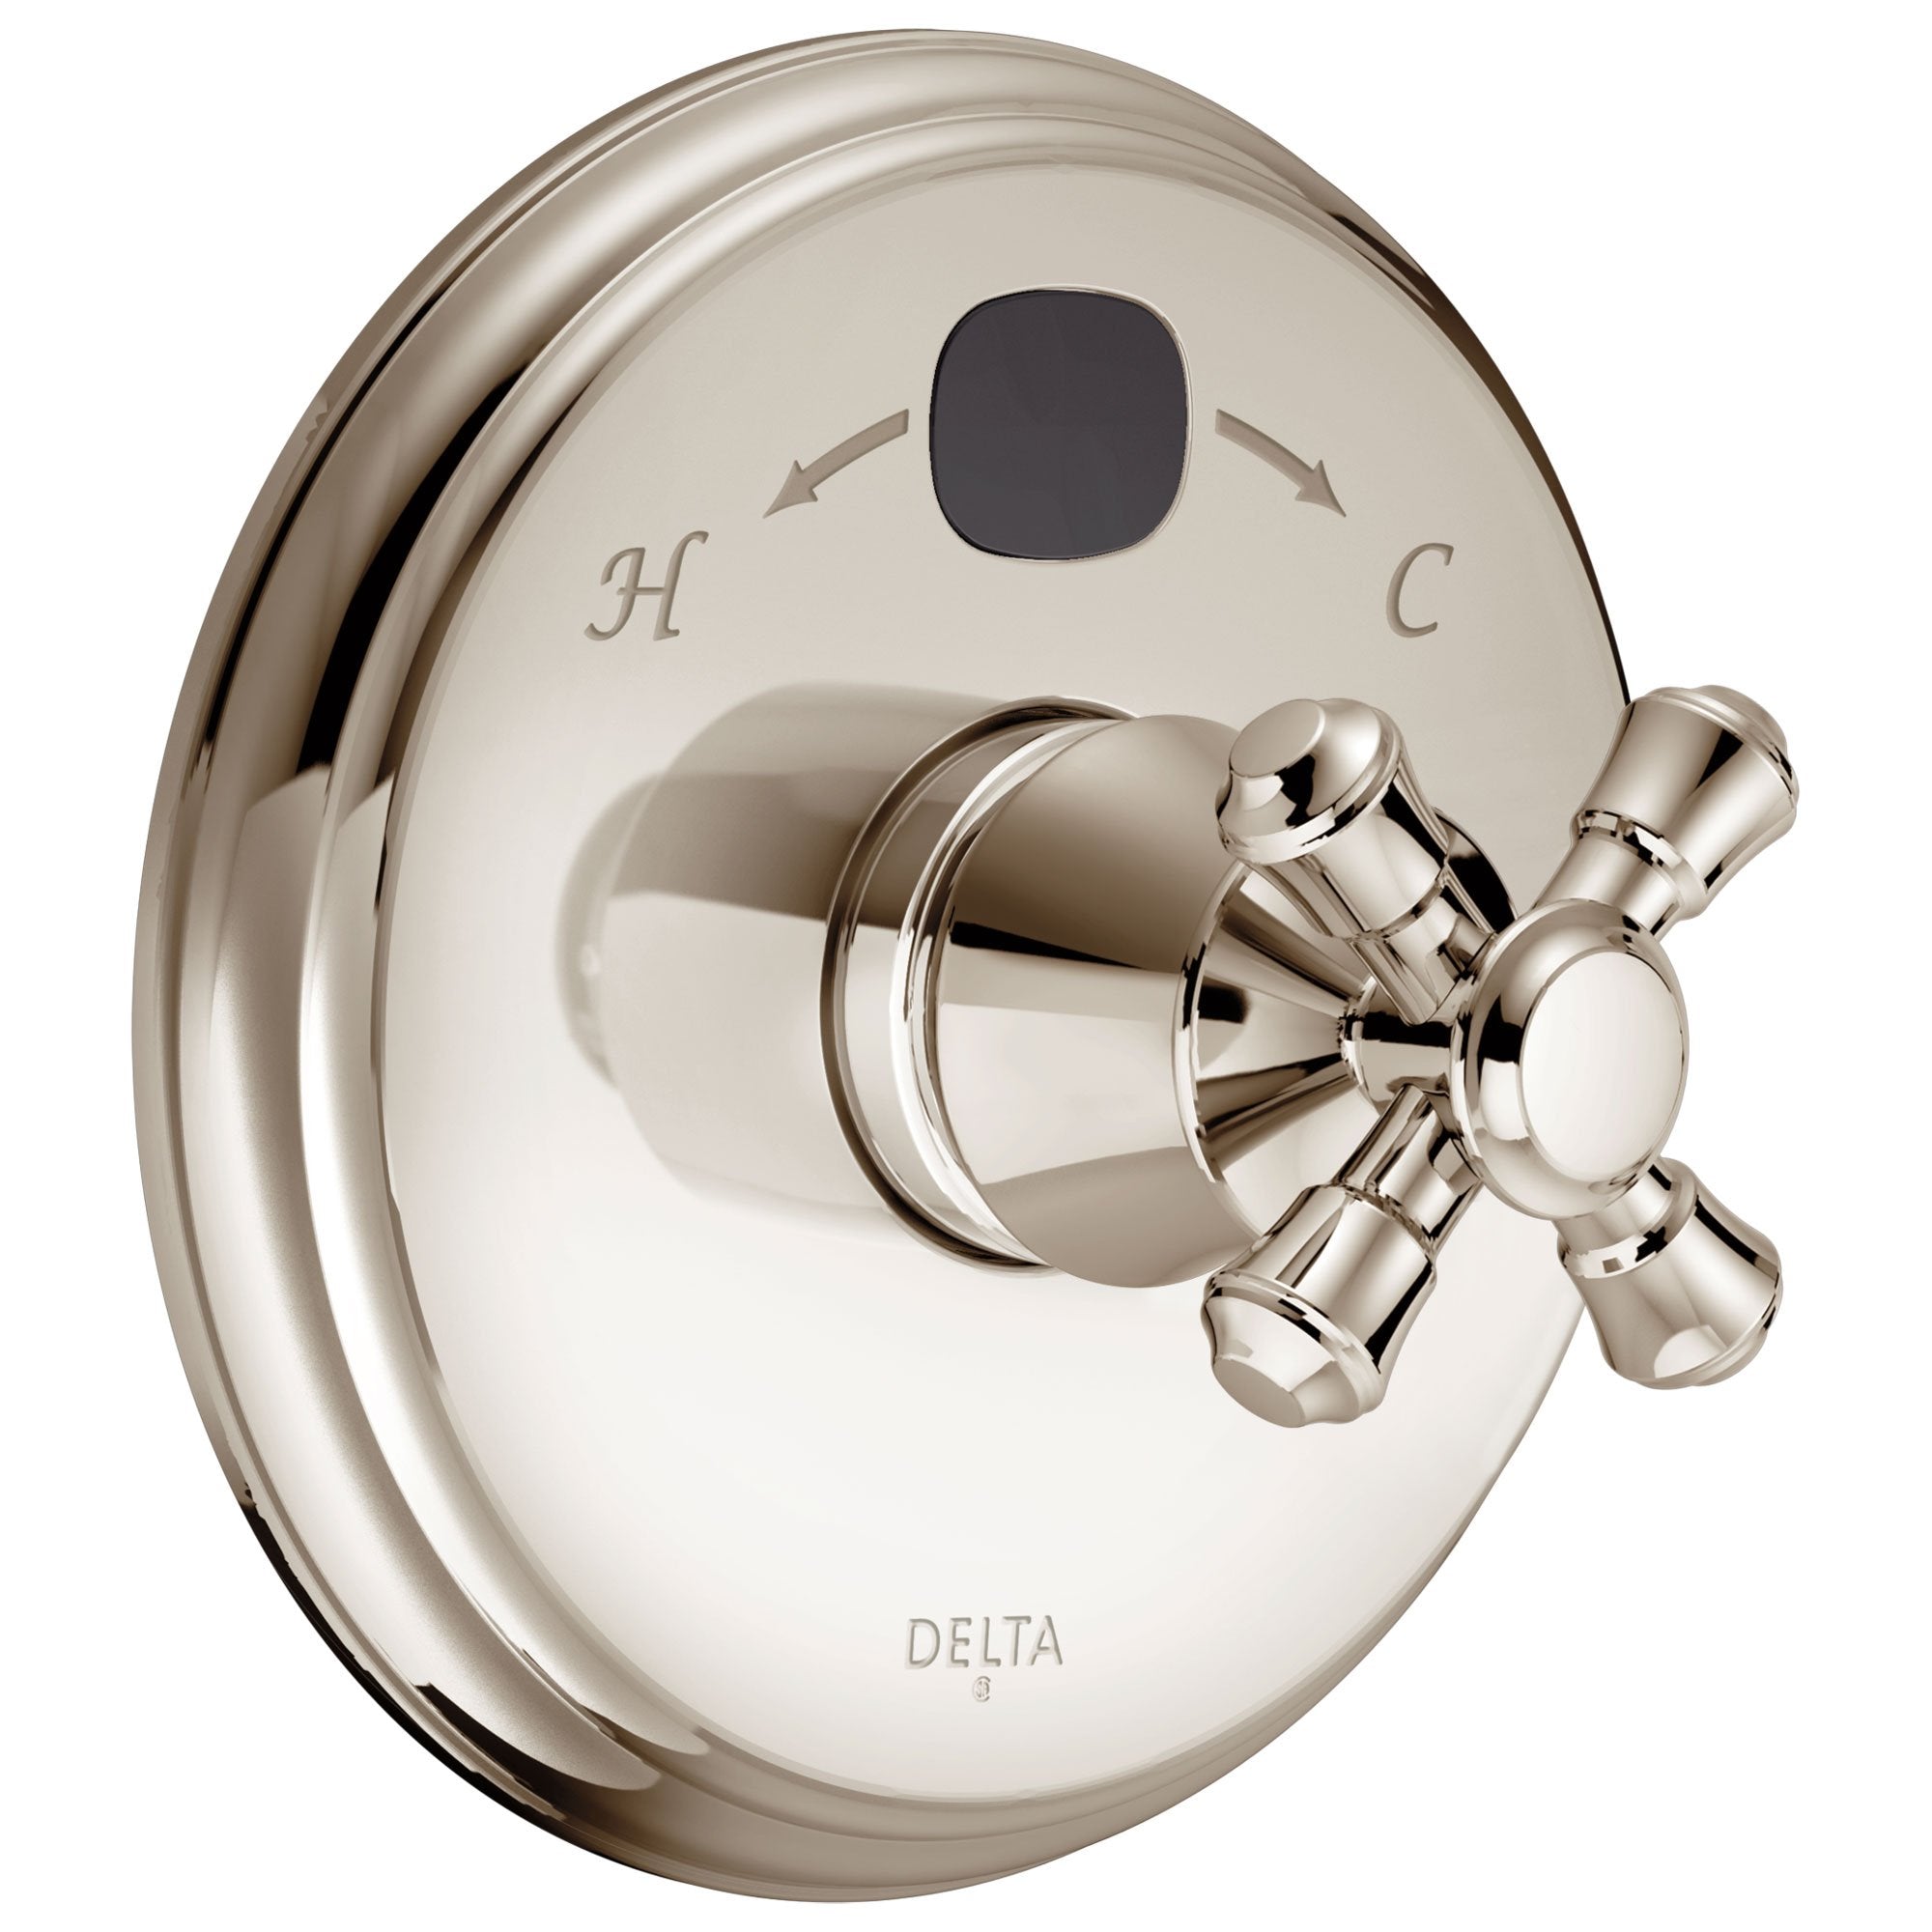 Delta Polished Nickel Cassidy Collection 14 Series Digital Display Temp2O Shower Valve Control COMPLETE with Single Cross Handle and Valve without Stops D1682V